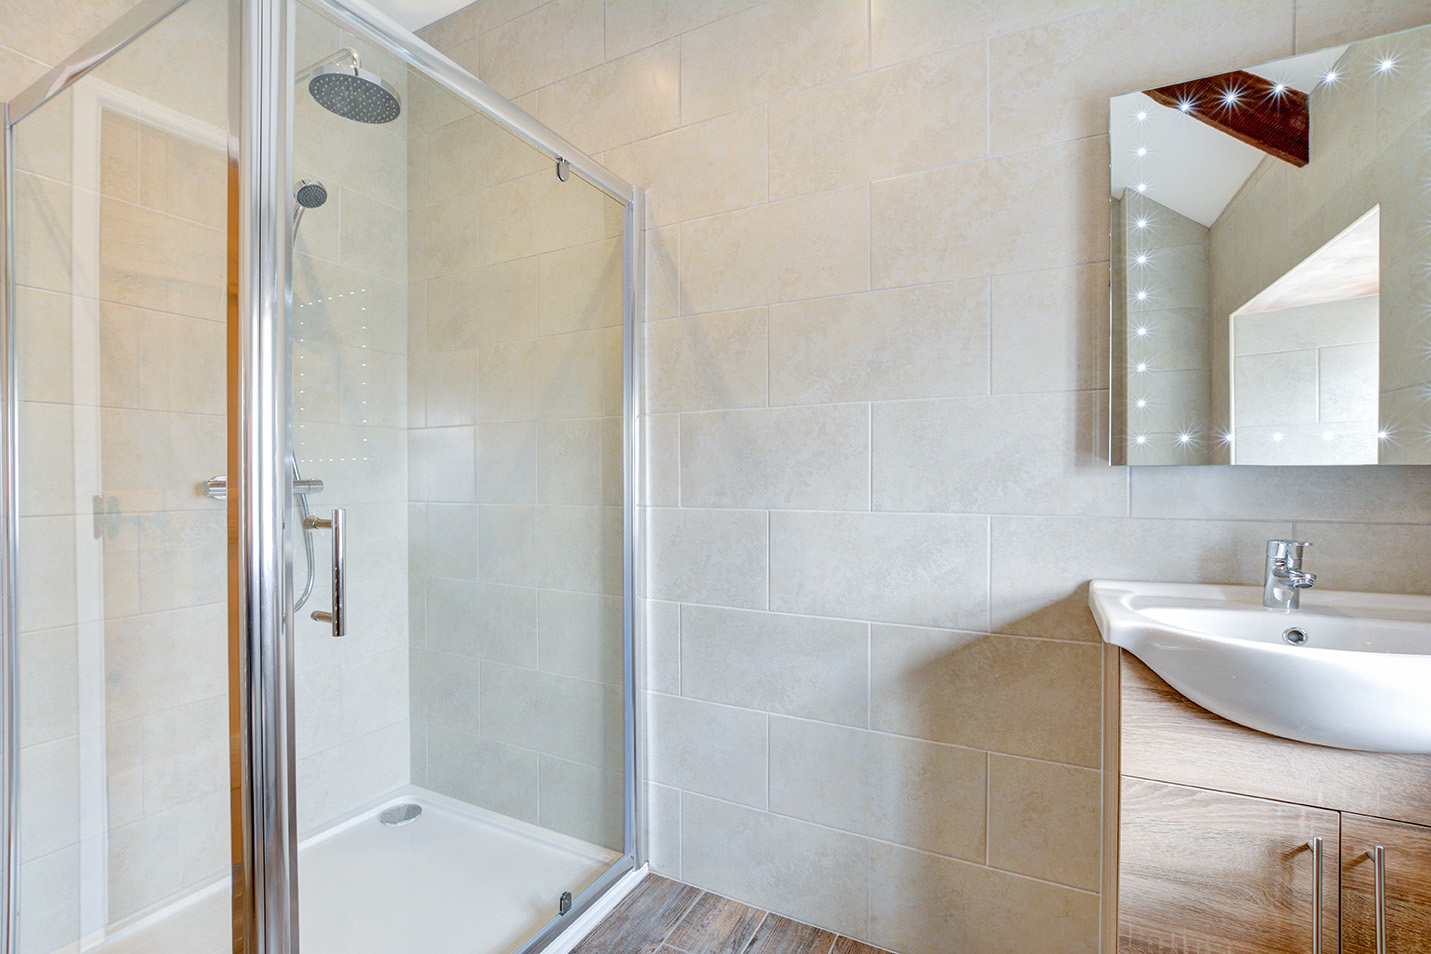 The bathroom of Otterbridge luxury self catering converted barn holiday cottage at Penrose Burden in North Cornwall.jpg